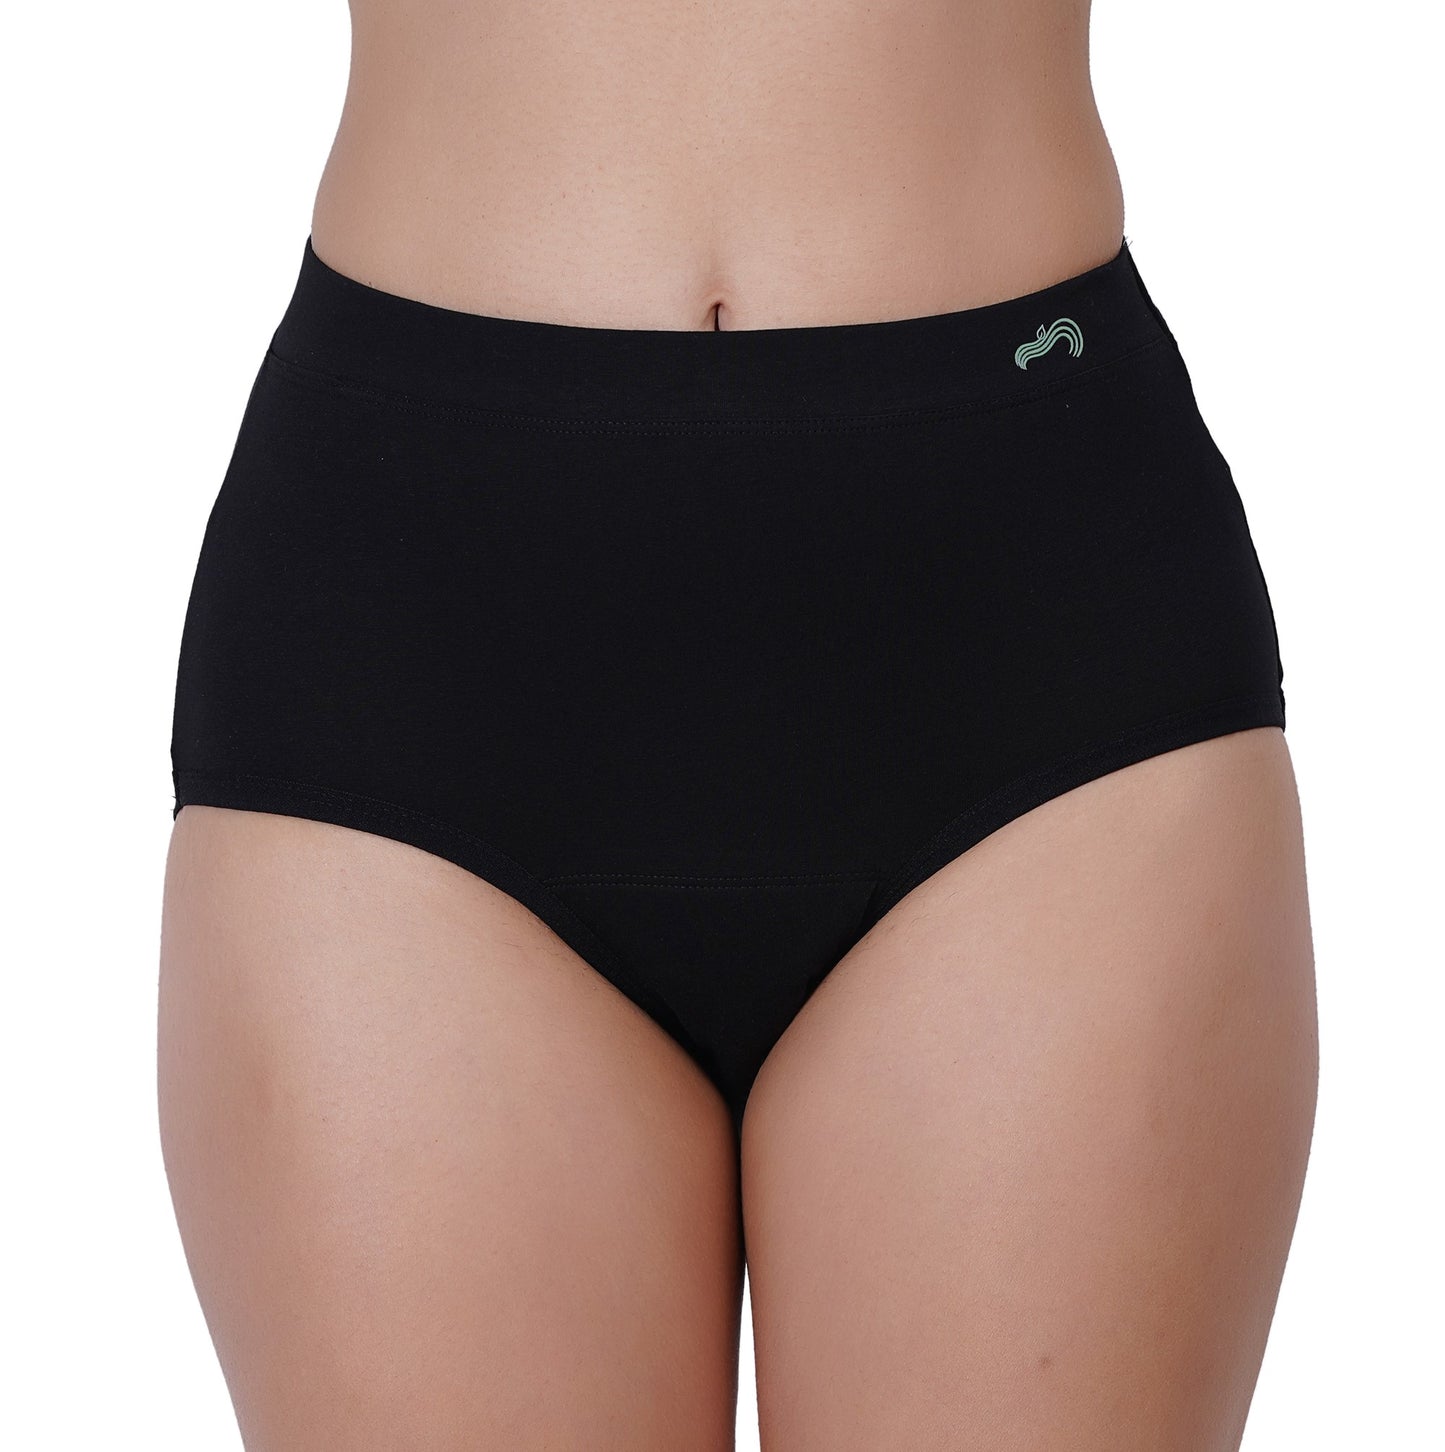 The Period Company, High Waisted Period Underwear for Women, for Heavy  Flows, Menstrual Panties for Teens, Incontinence, Absorbent Panty, Extra  Coverage, Leak Resistant, Extended Gusset